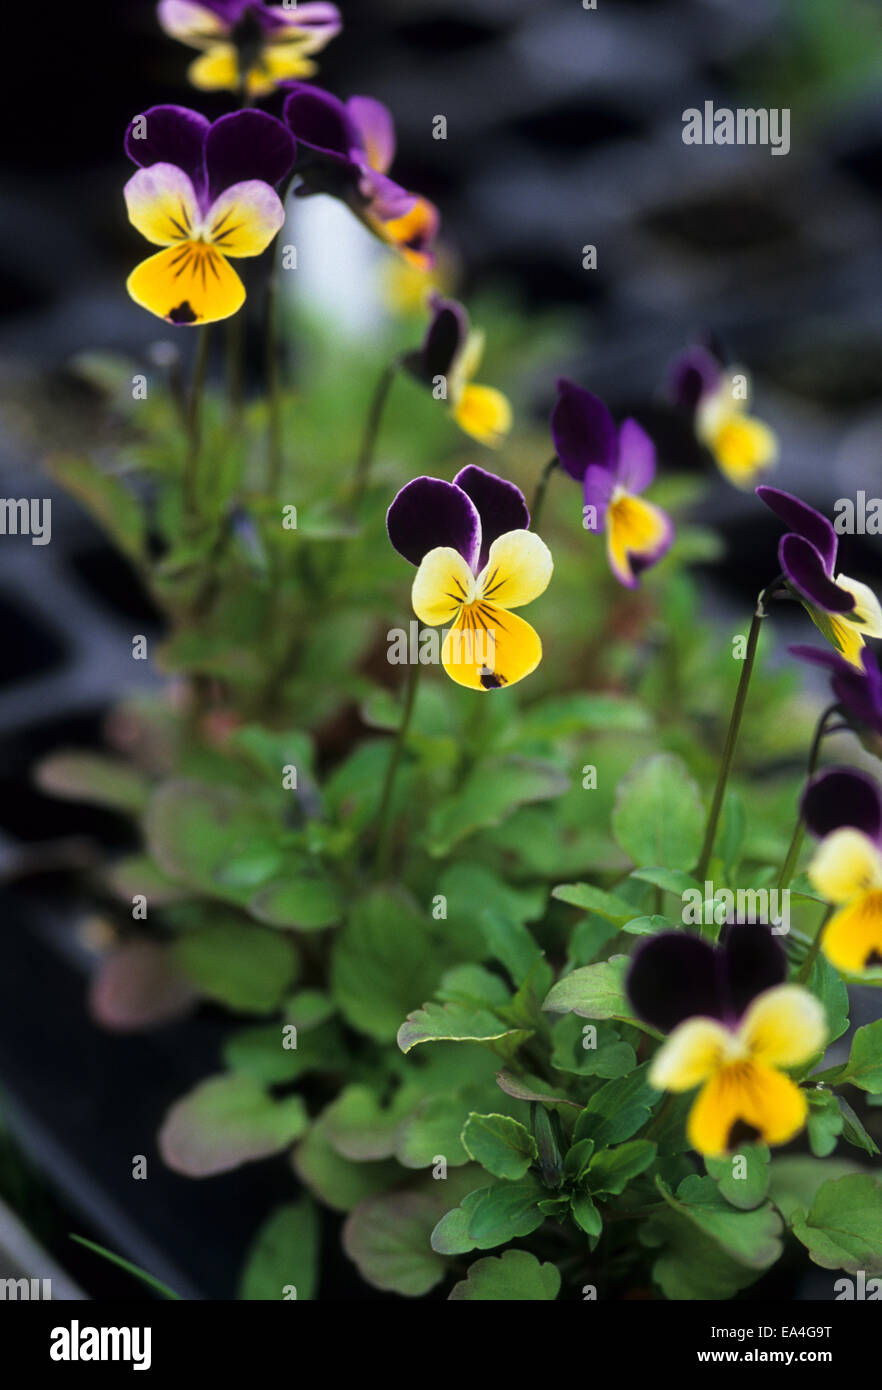 Close up image of Johnny Jump Heartease viola in a black plastic tray. Stock Photo